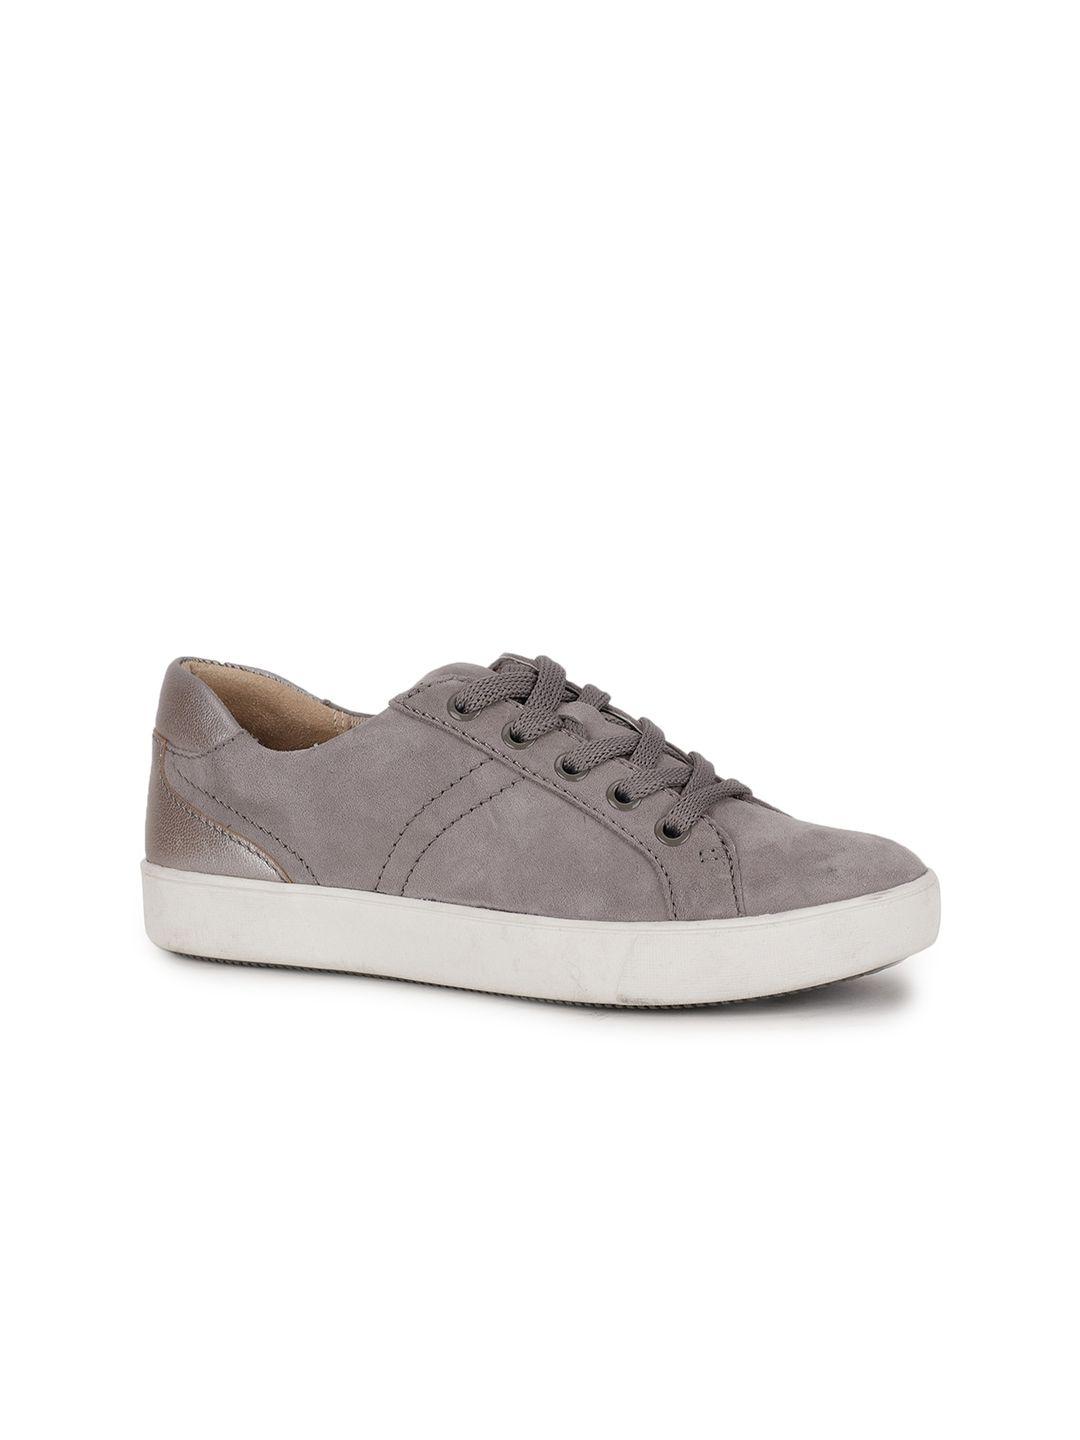 naturalizer women grey leather sneakers